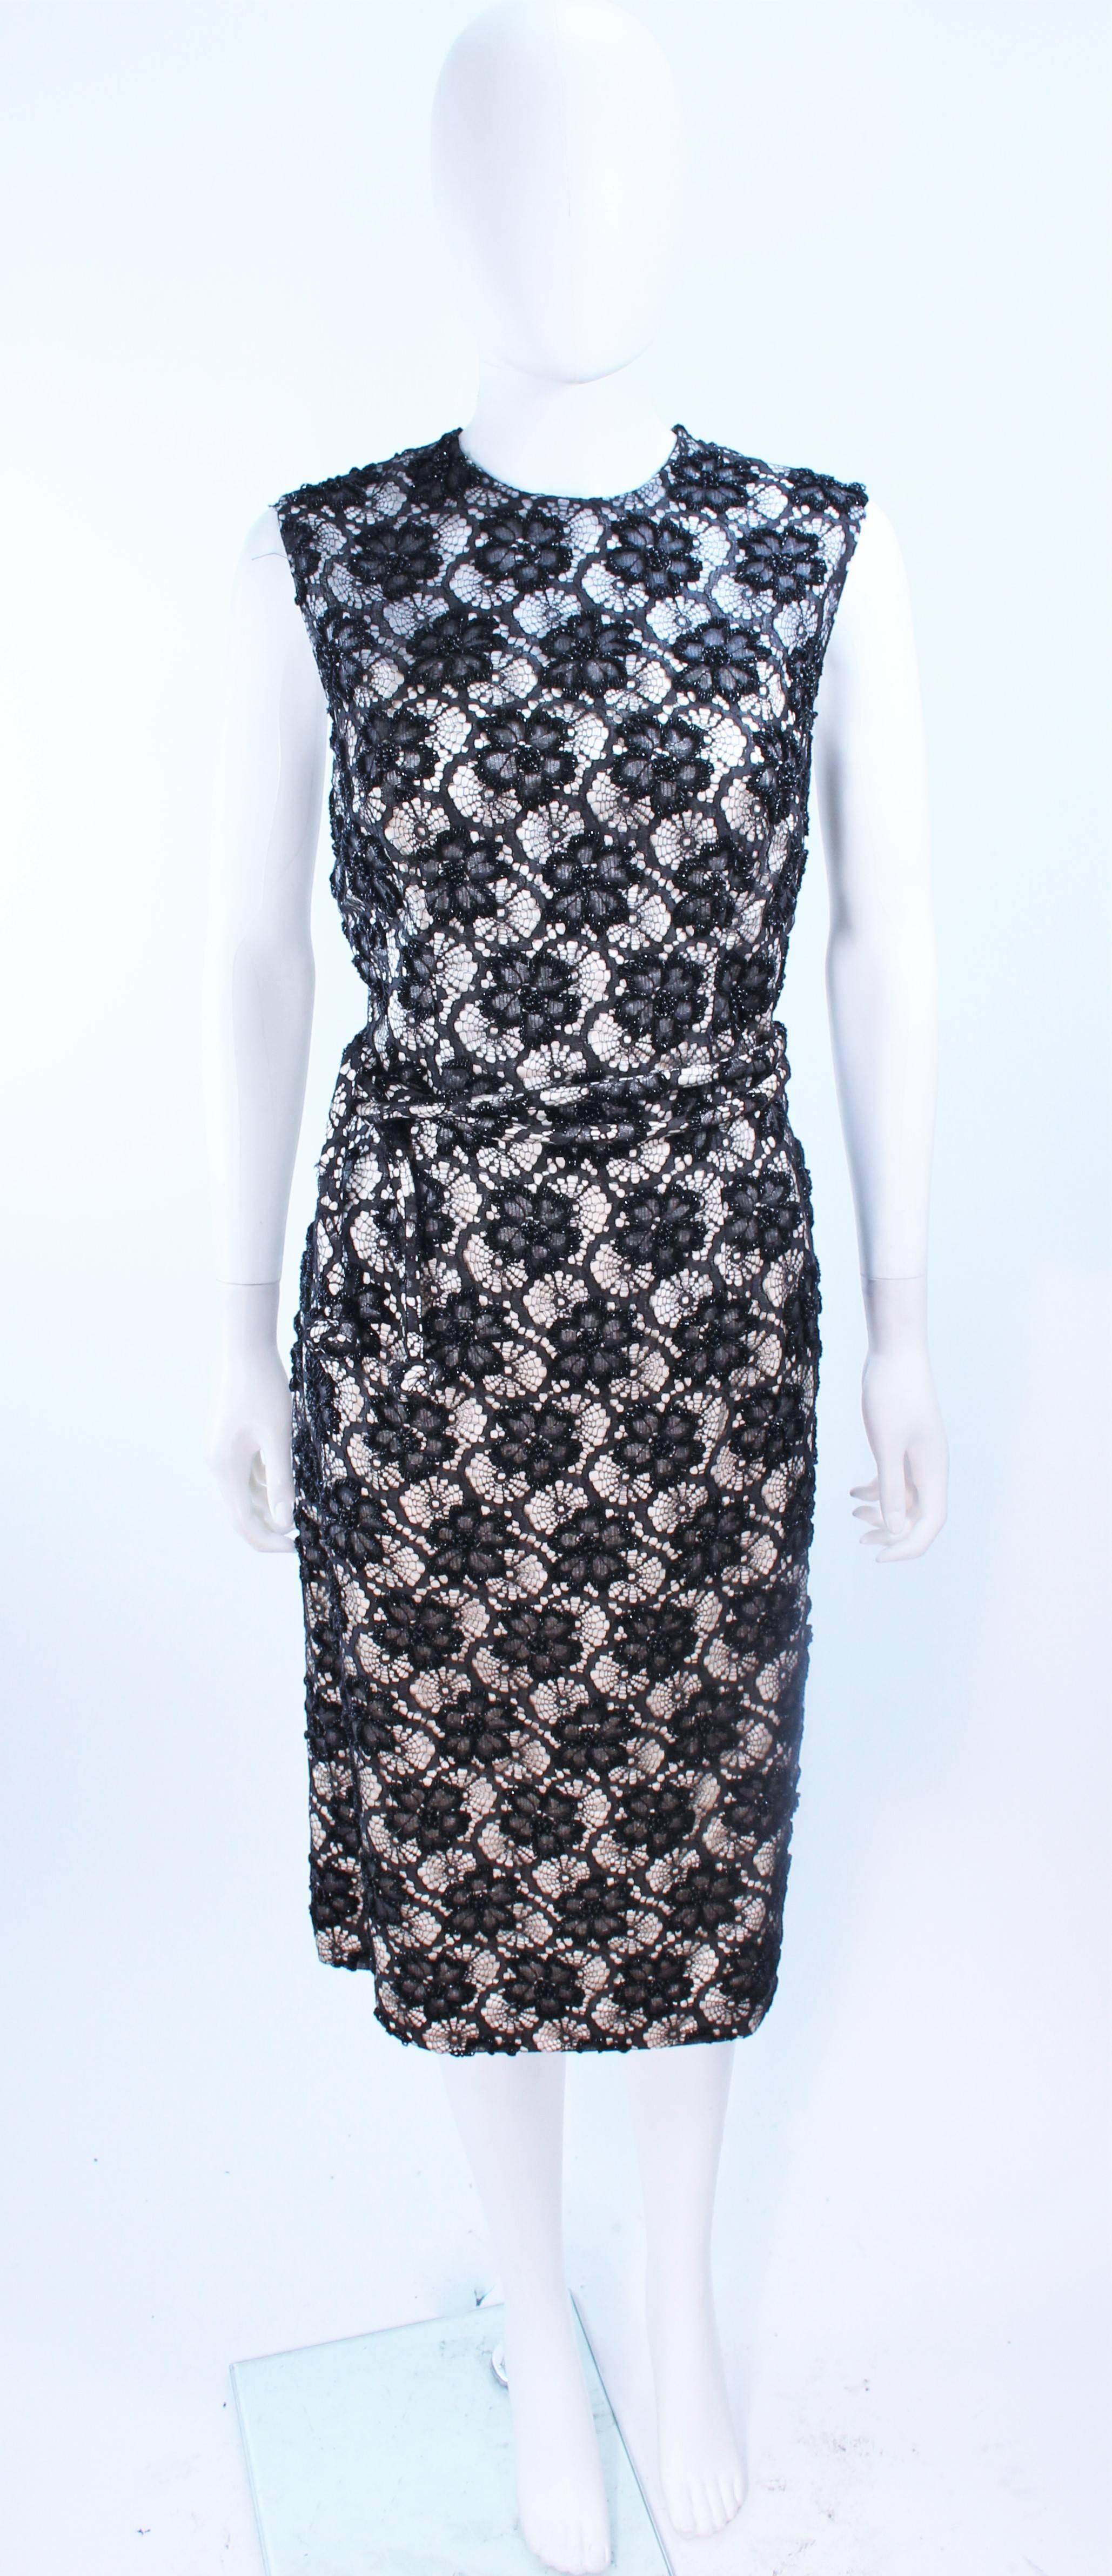 This Swee Lo for Haute Couture International dress is composed of a black and white beaded silk. Features a floral pattern with belt. There is a center back zipper closure. In excellent vintage condition, with original tags.

**Please